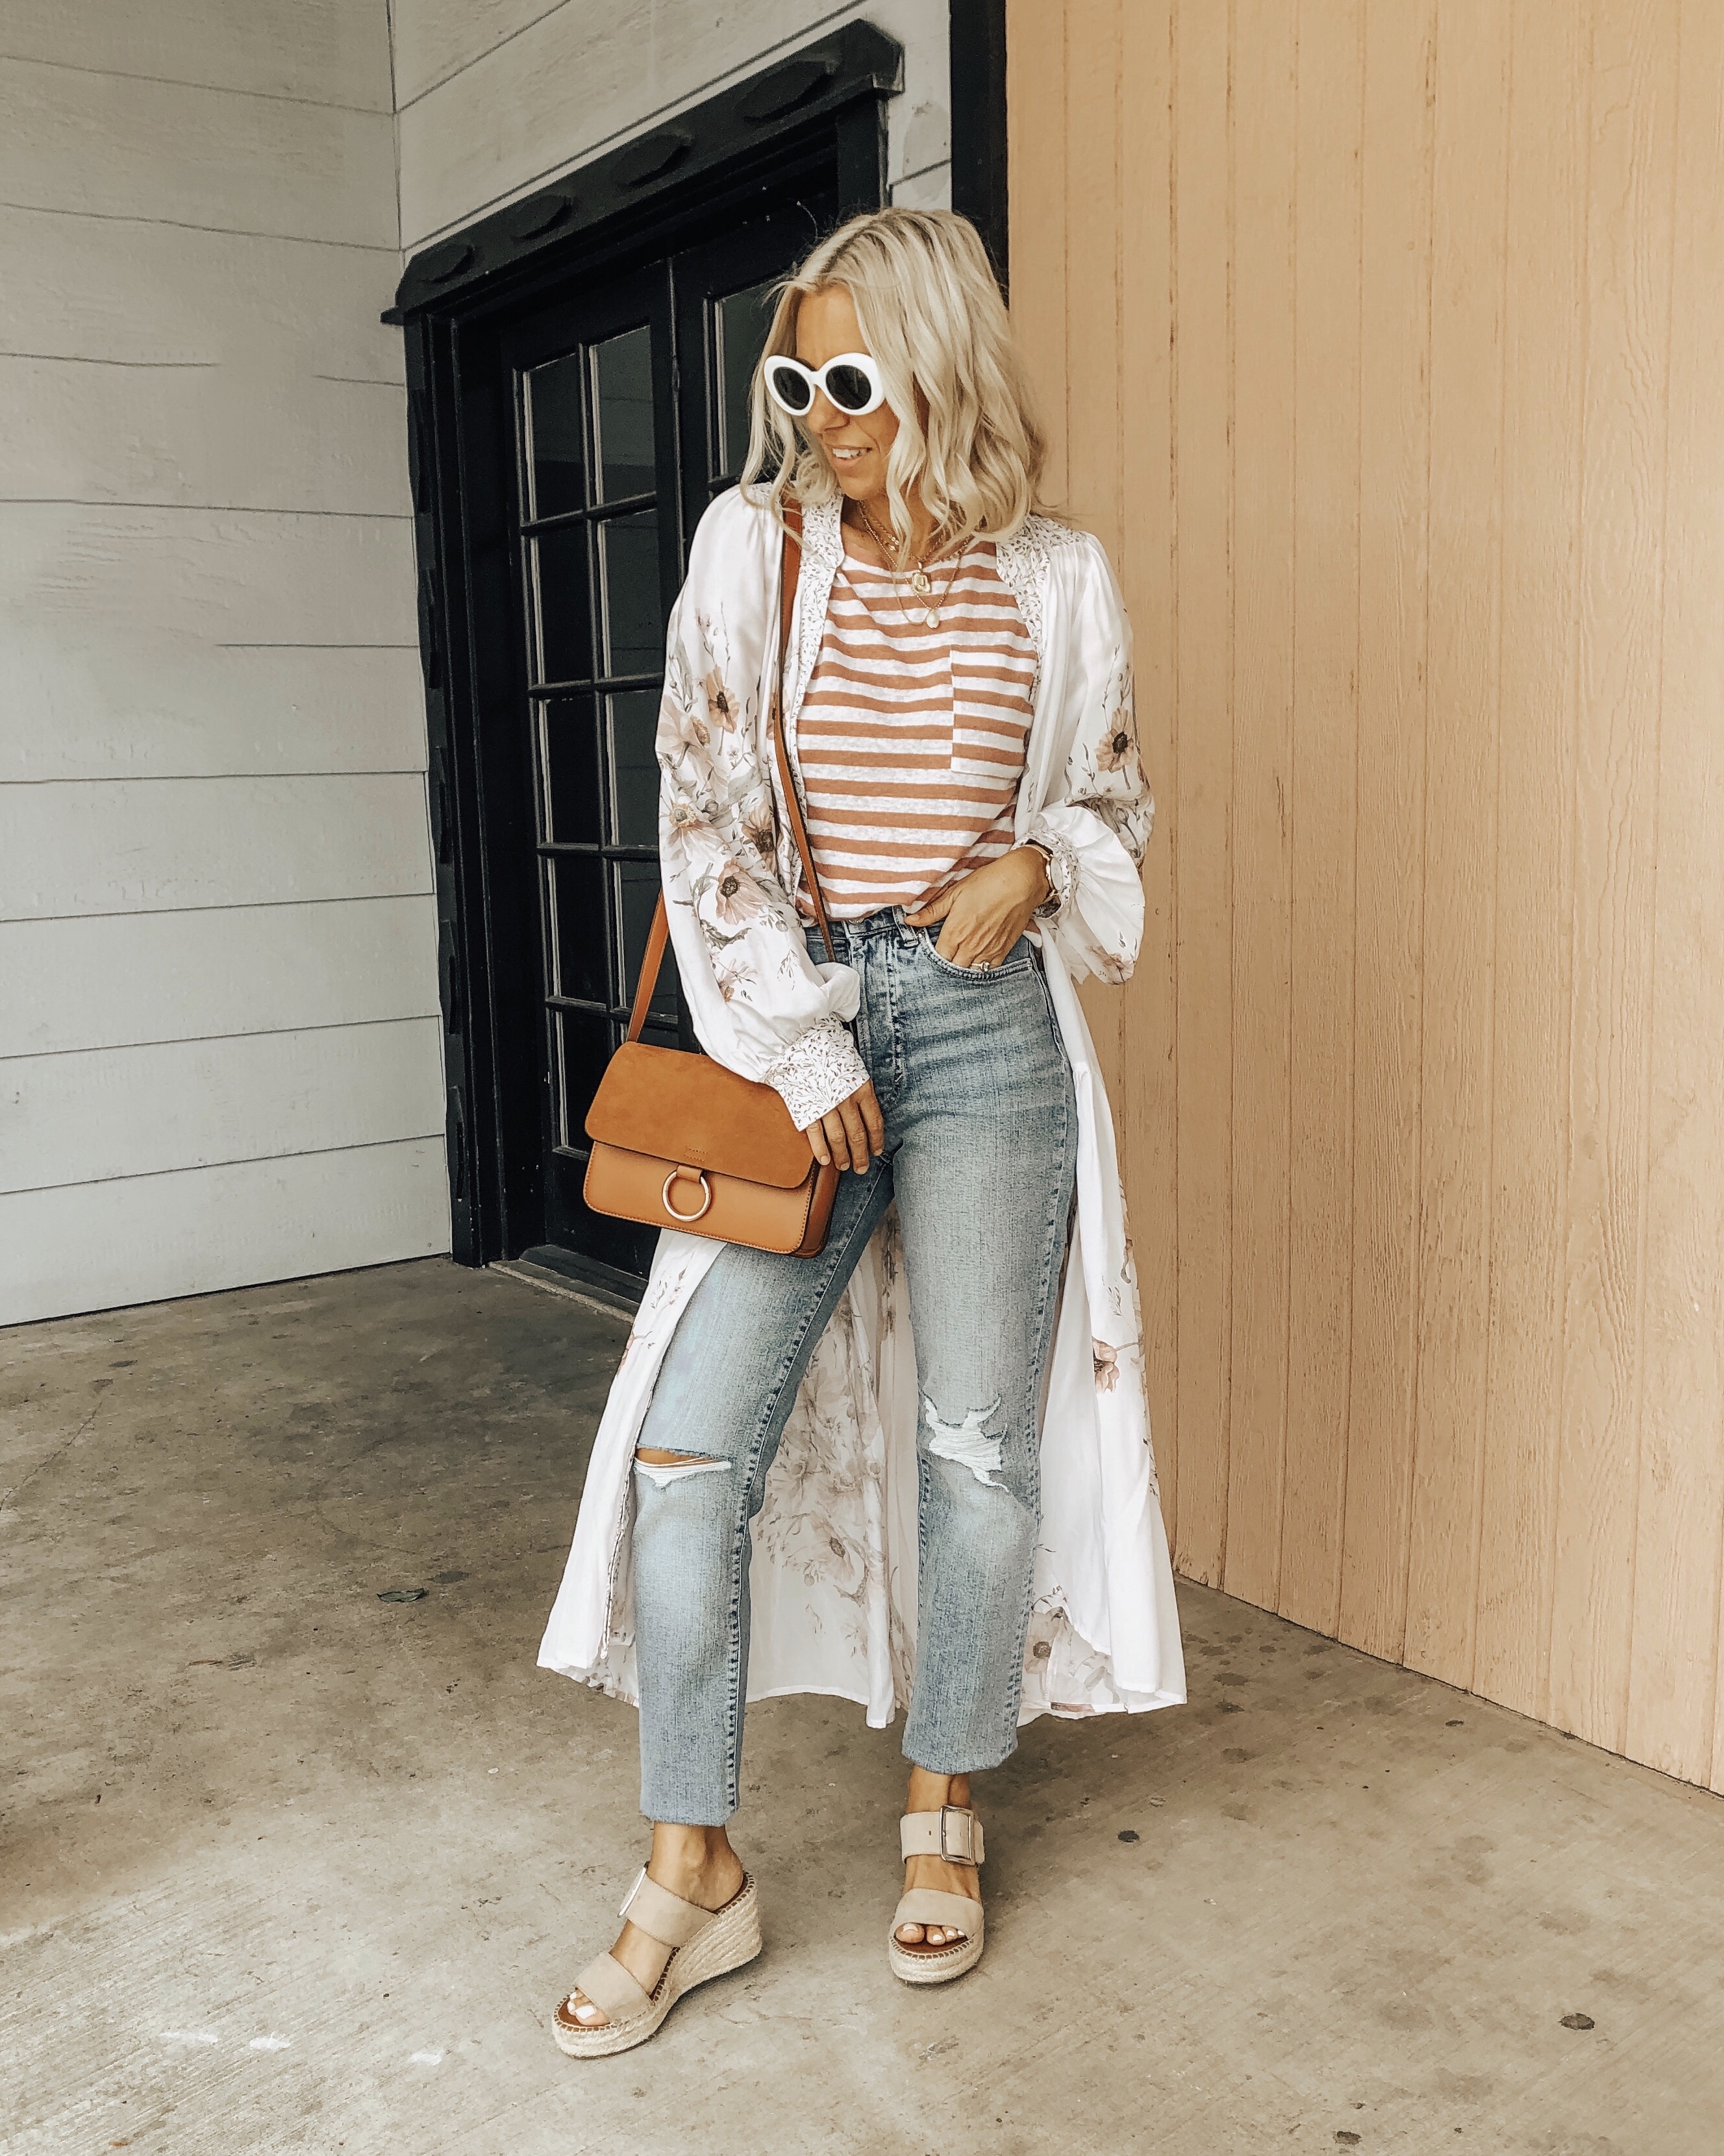 MEMORIAL DAY WEEKEND SALES- Jaclyn De Leon Style + Are you looking to update your wardrobe for the Summer? There are so many amazing sales this holiday weekend and so I'm sharing all the details including my top picks from each retailer! Don't miss these deals